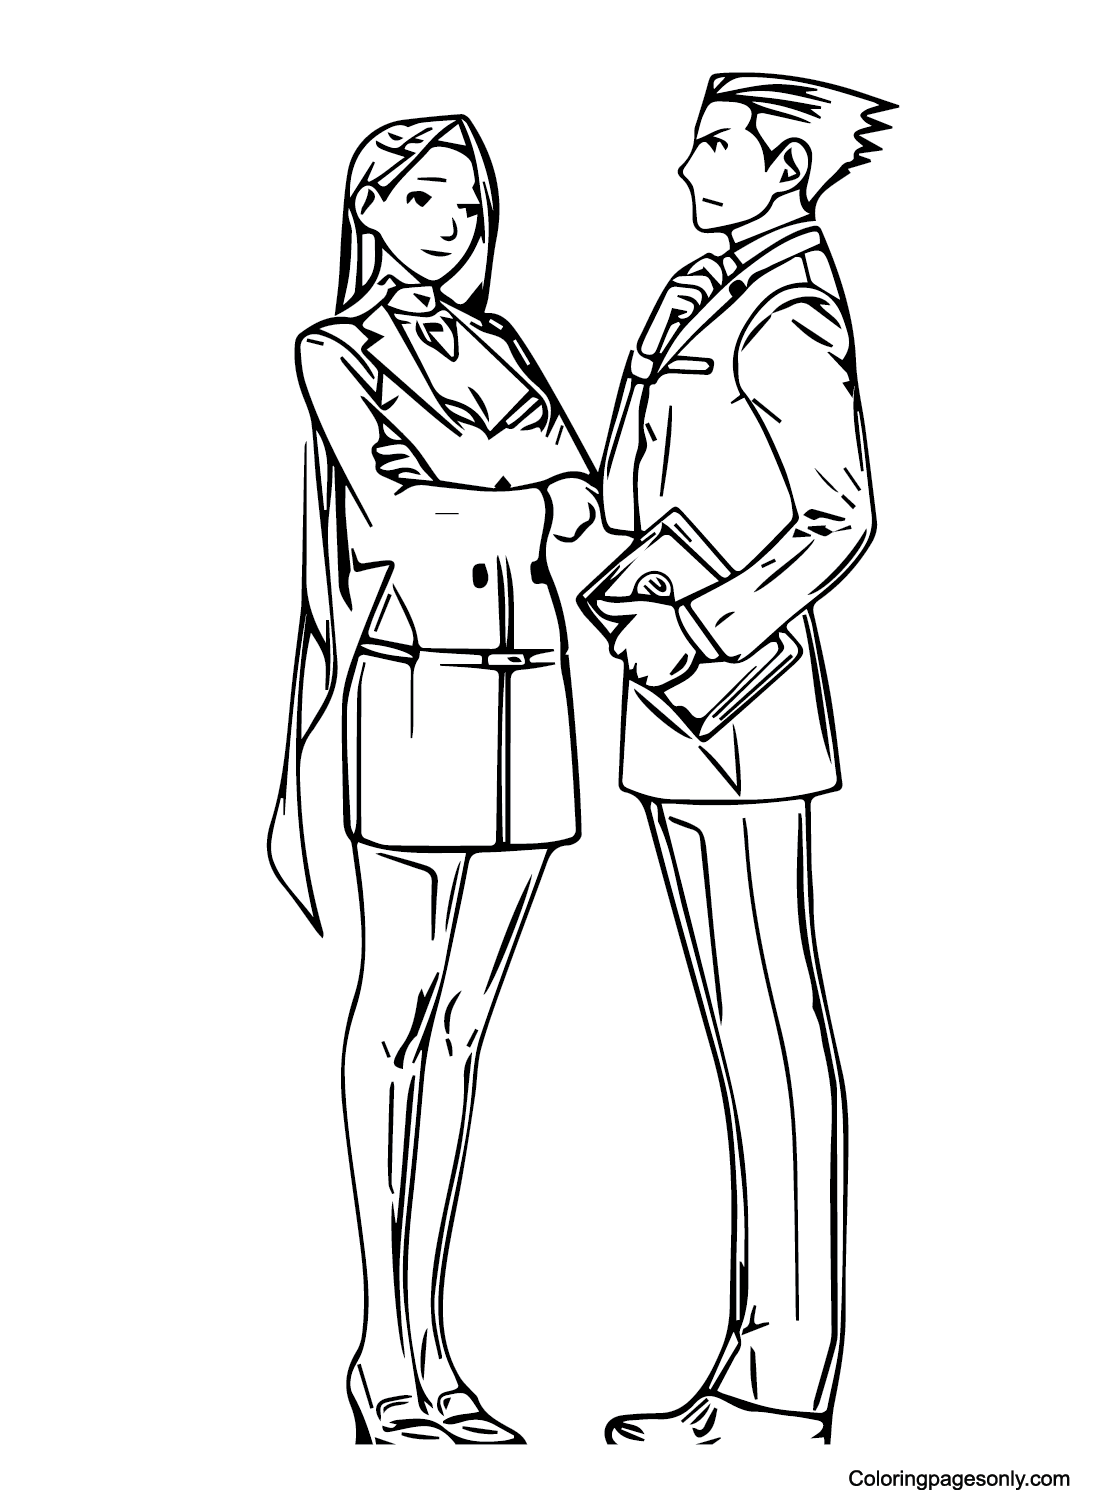 Mia Fey with Phoenix Wright Coloring Page